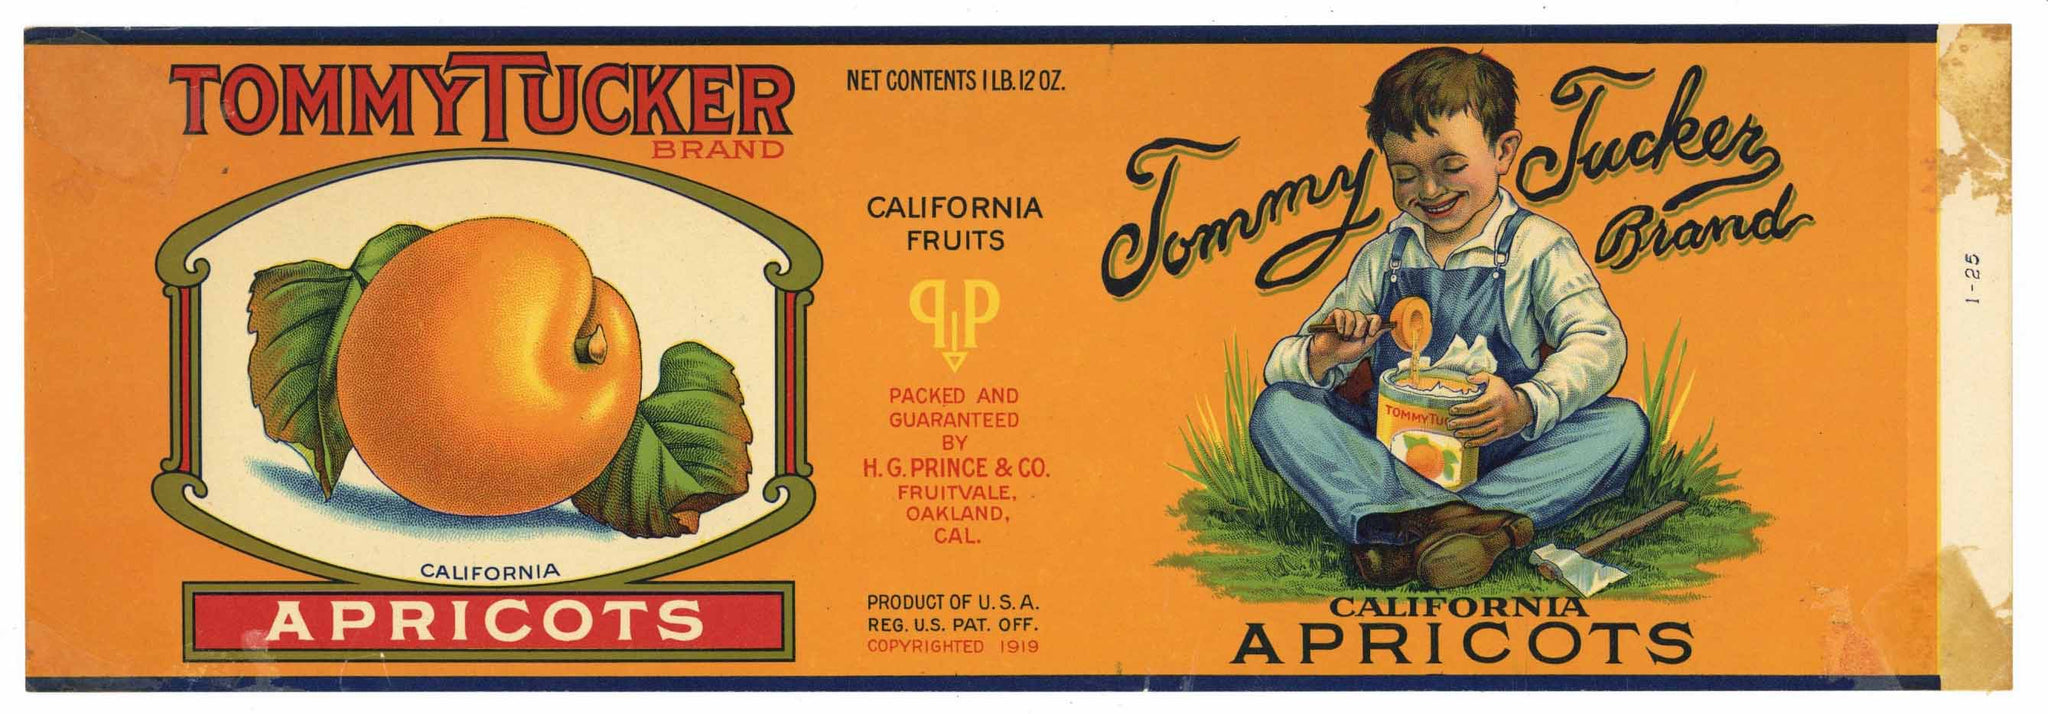 Tommy Tucker Brand Vintage Apricot Can Label